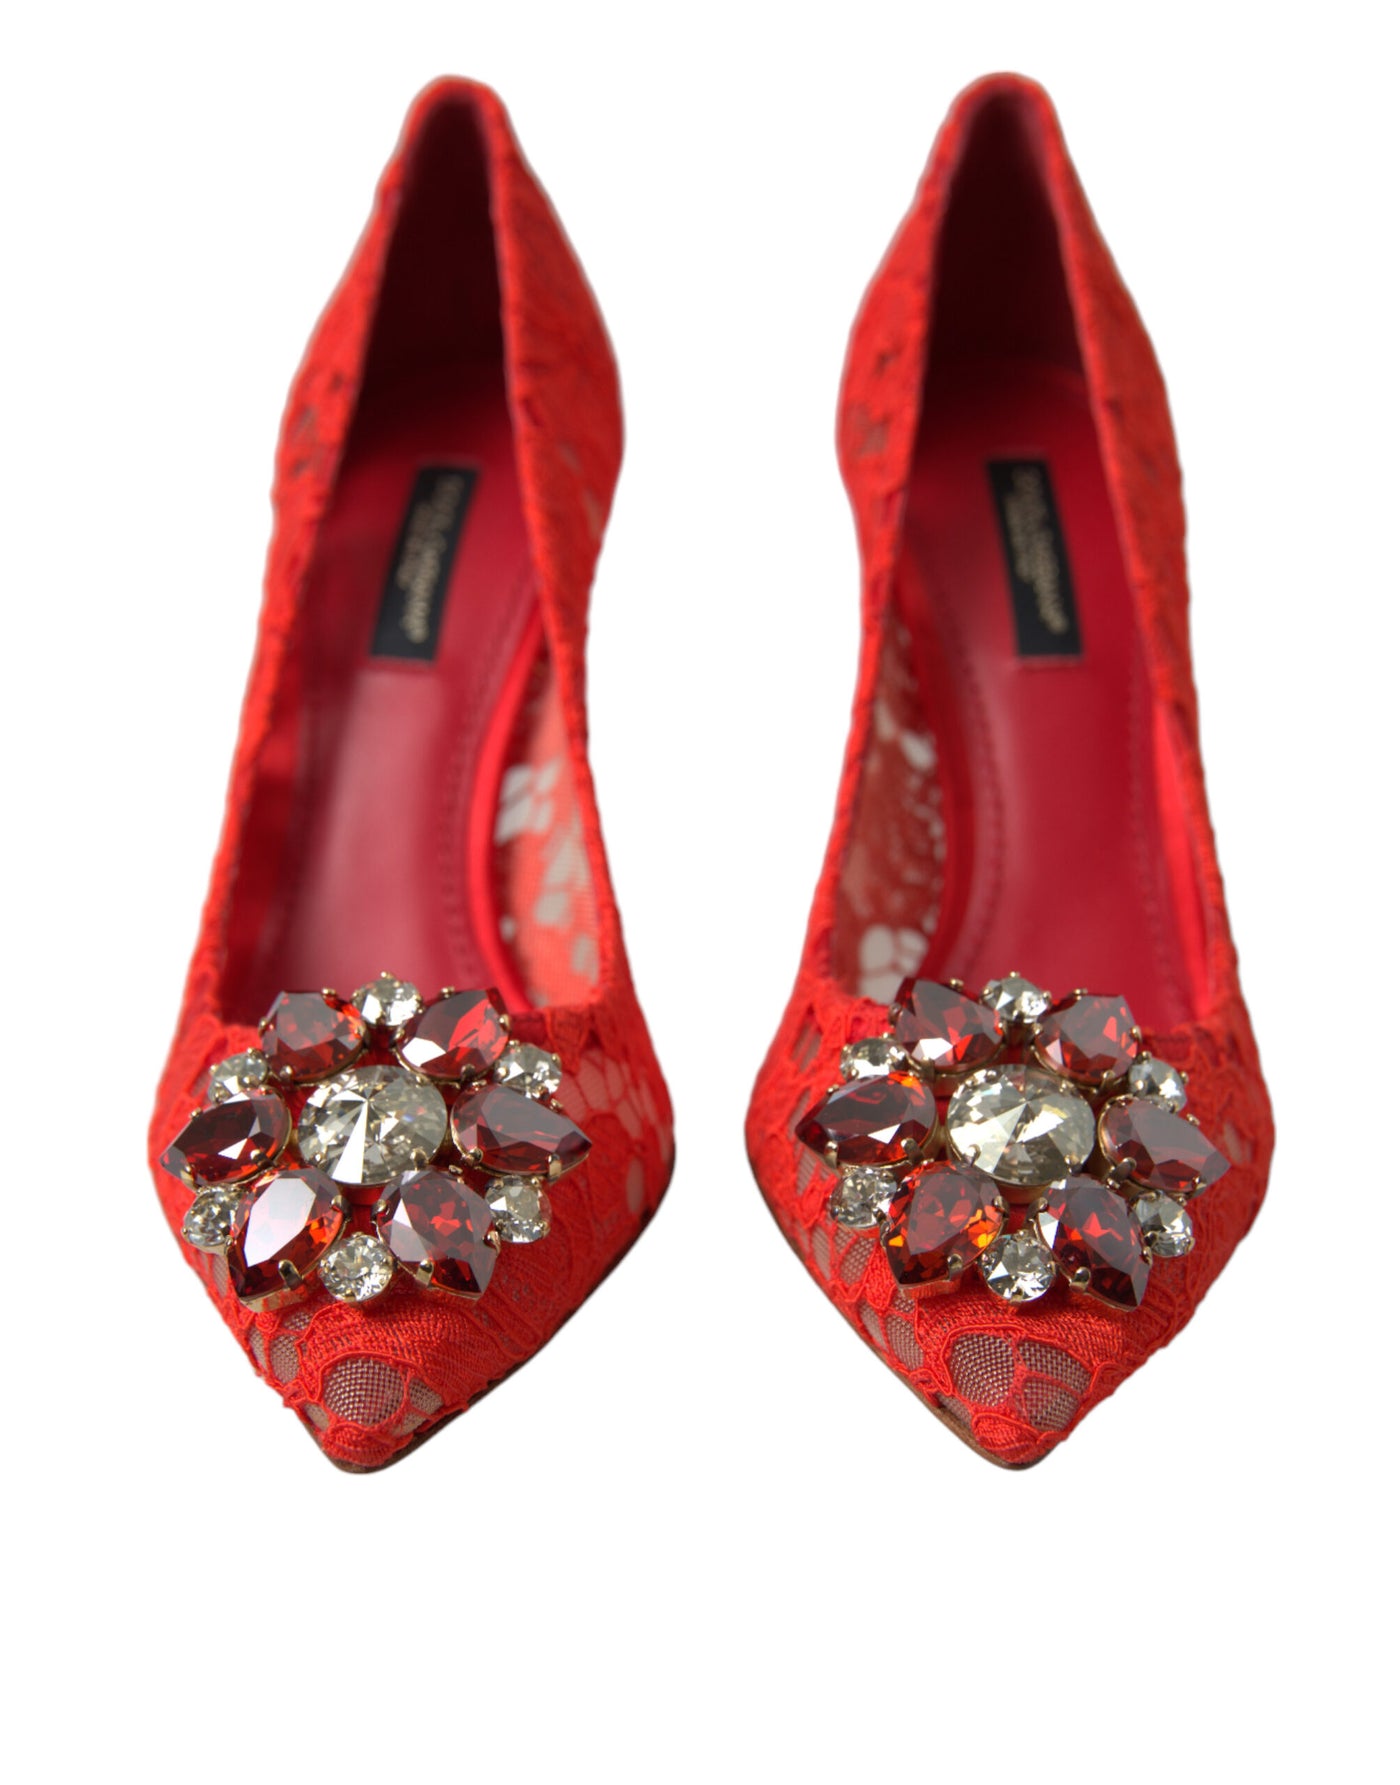 Red Taormina Lace Crystal Heels Pumps Shoes